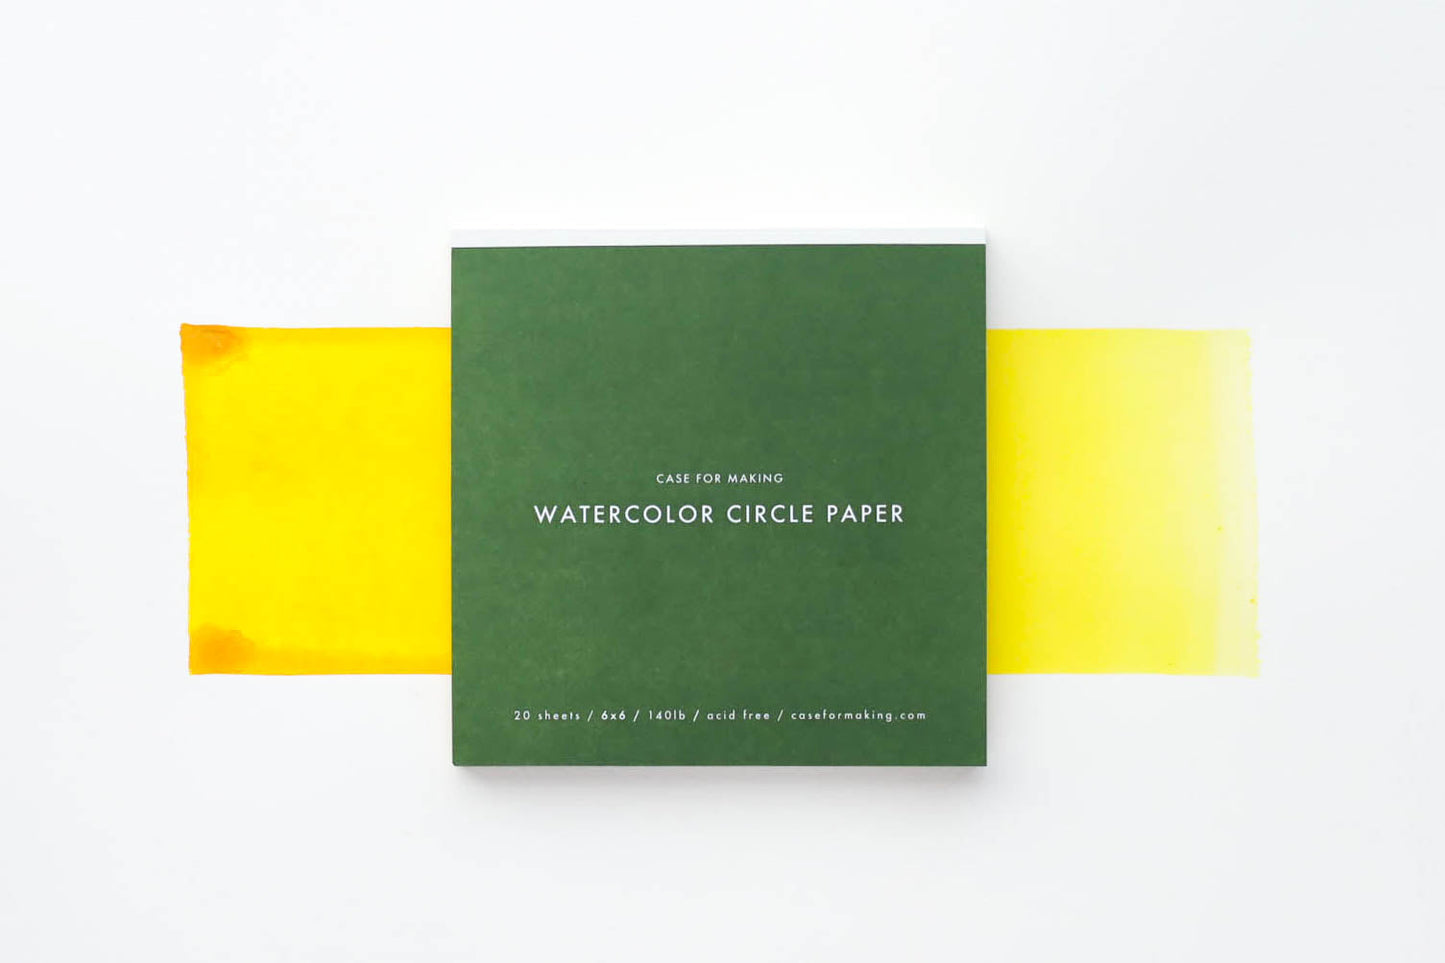 The closed, top-bound 6" x 6" Watercolor Circle Paper pad.  Showing the forest green cover with white lettering. 